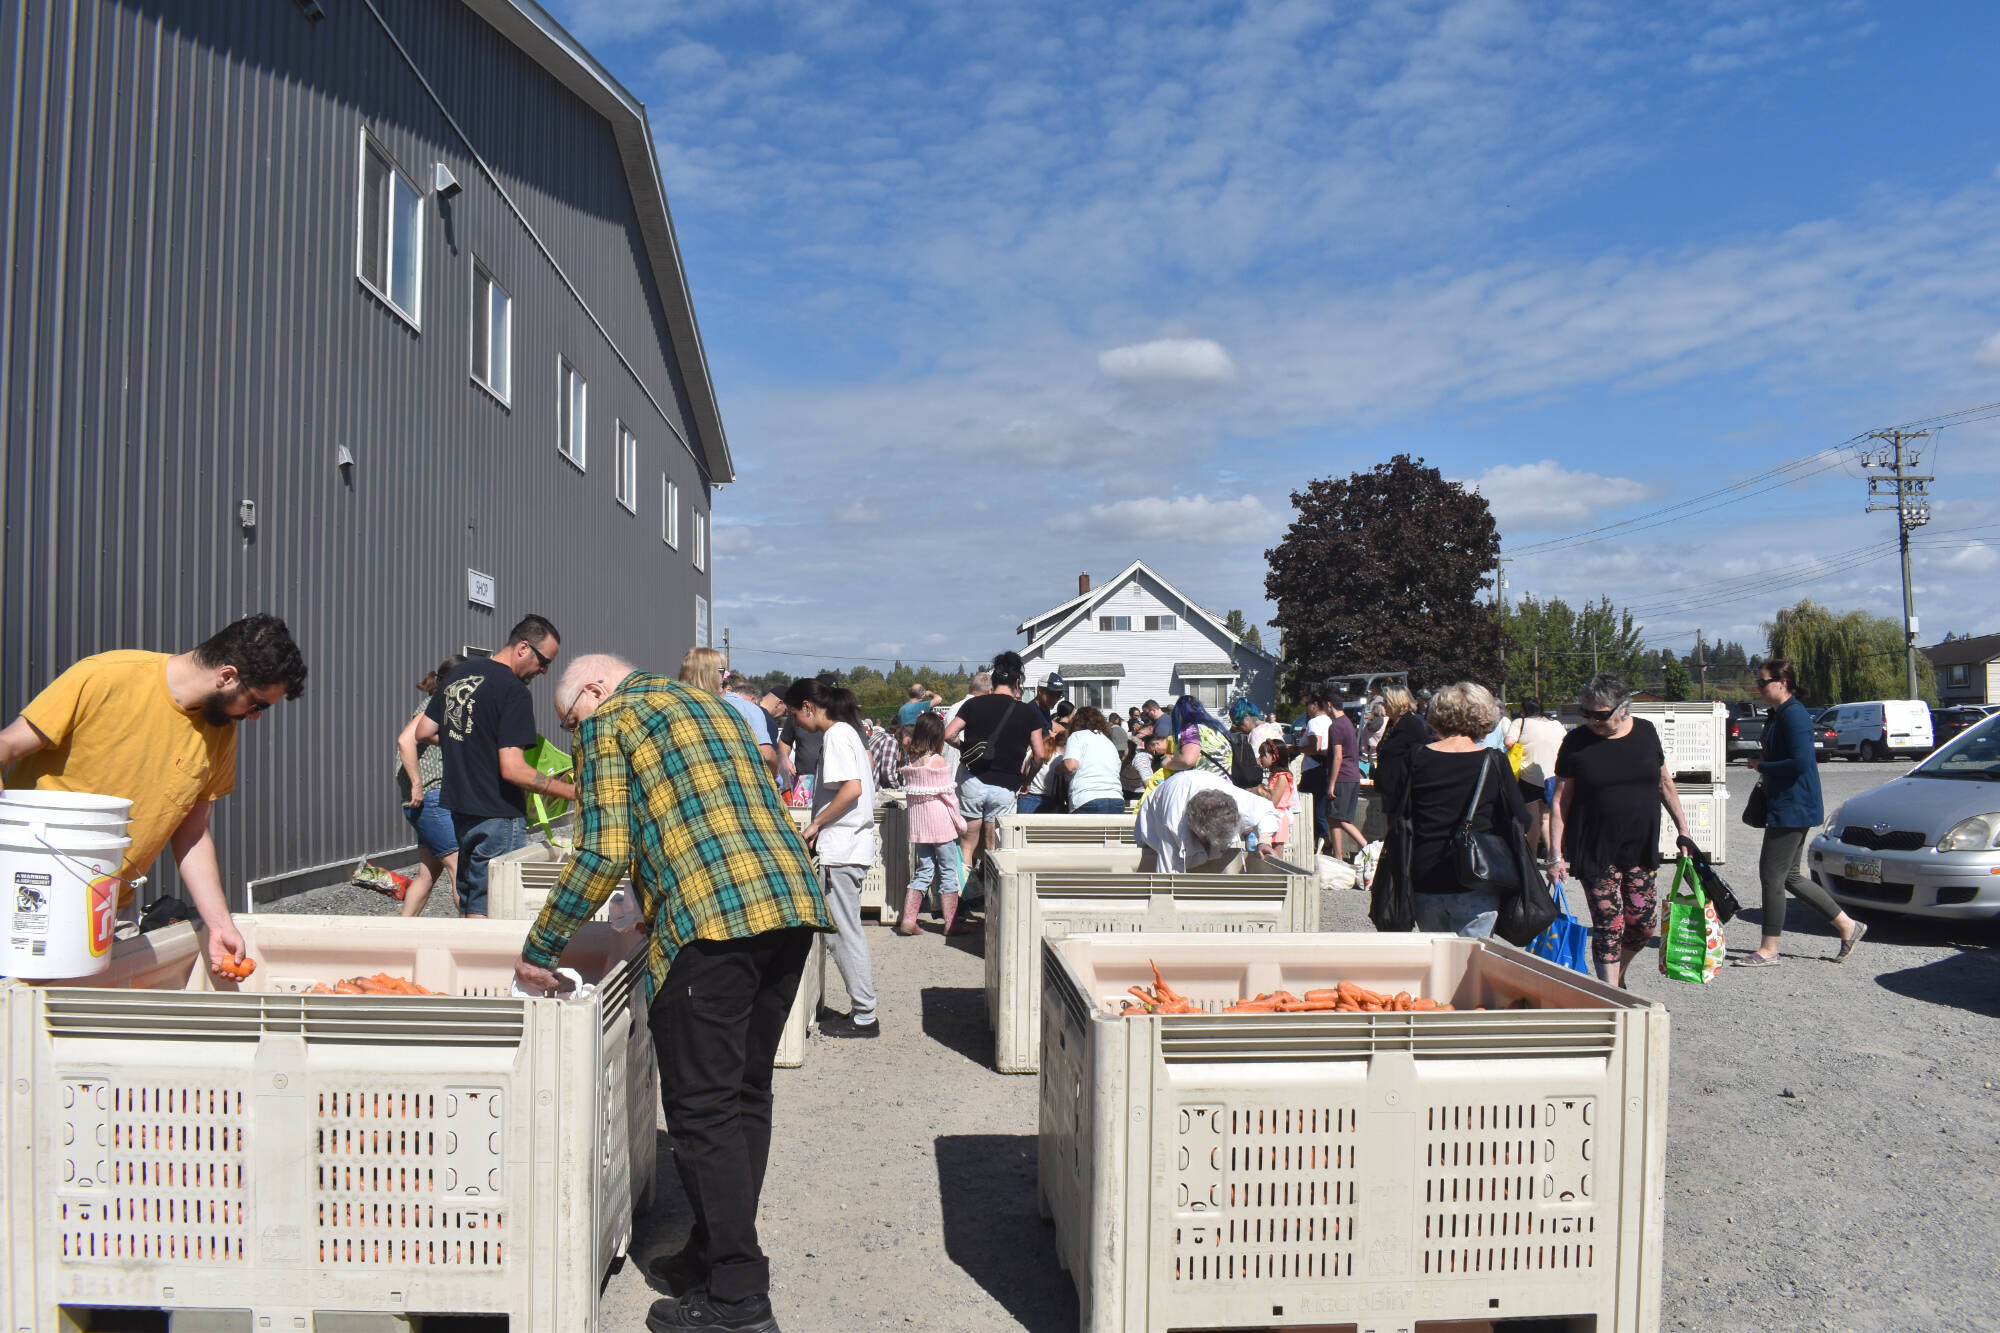 People picked up free potatoes (as well as some squash and carrots) at the Sept. 17 Ugly Potato Day at the Heppell family farm in South Surrey and again on Saturday, Oct. 14, which was Ugly Produce Day. (Tricia Weel photo)